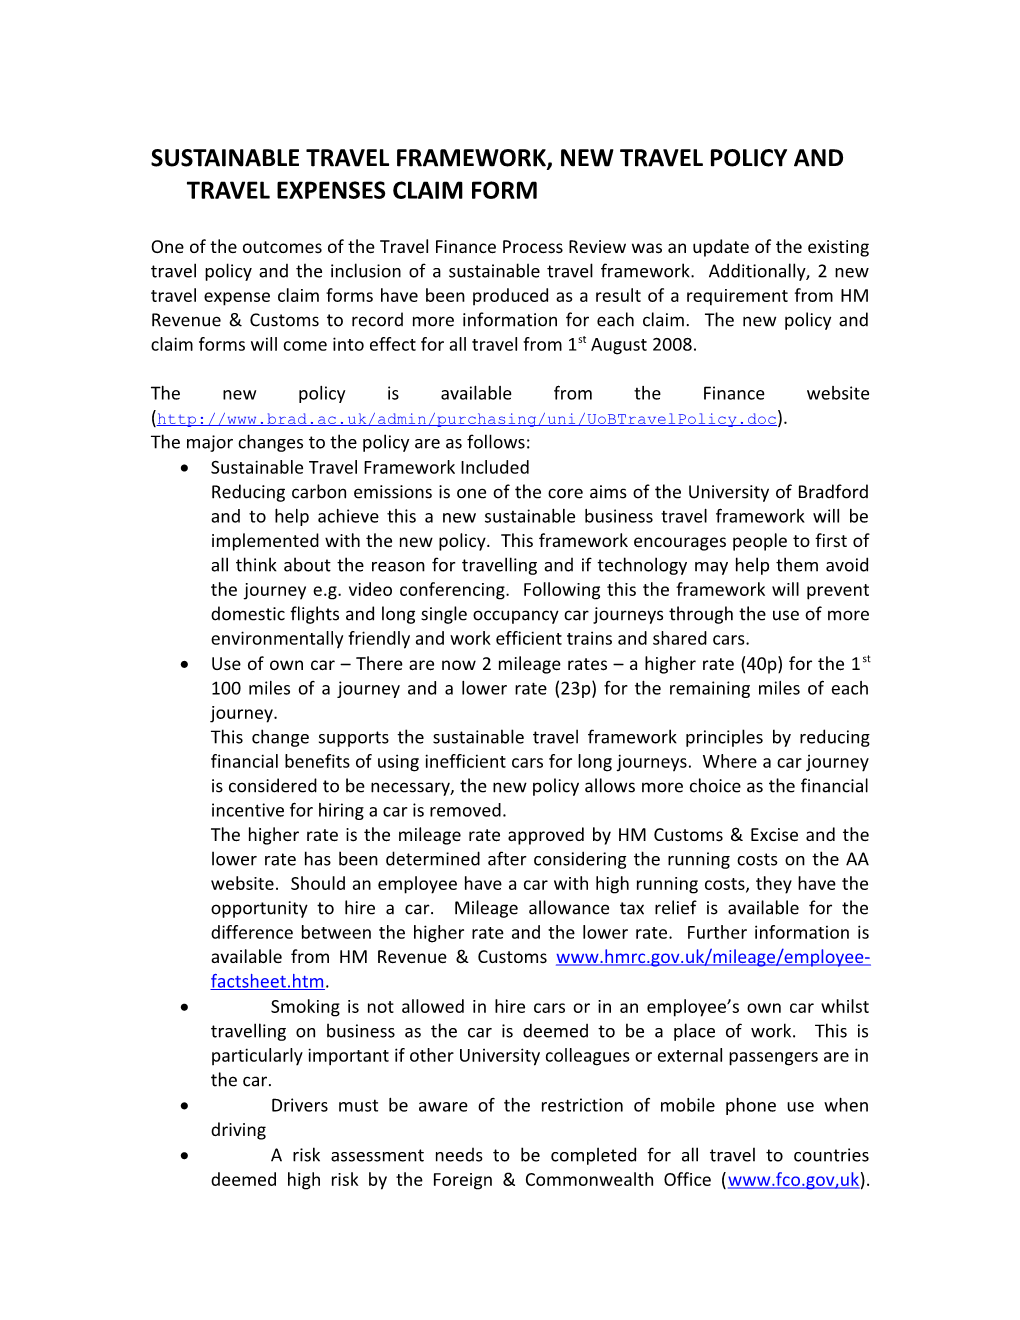 Changes to Travel Policy and Travel Expenses Claim Form